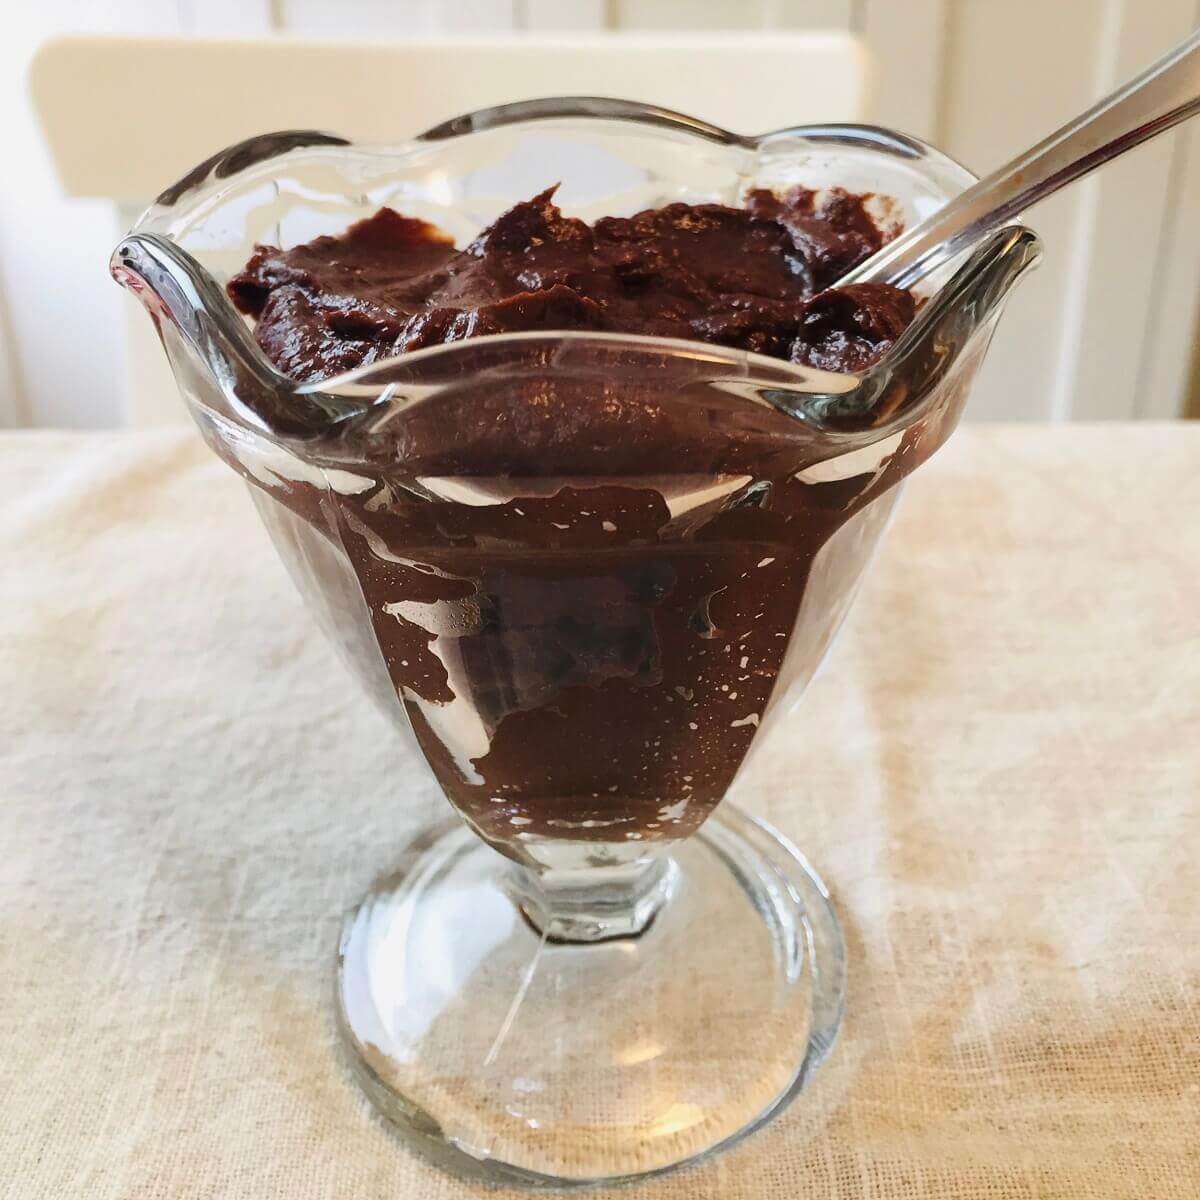 A glass dish filled with avocado chocolate pudding.